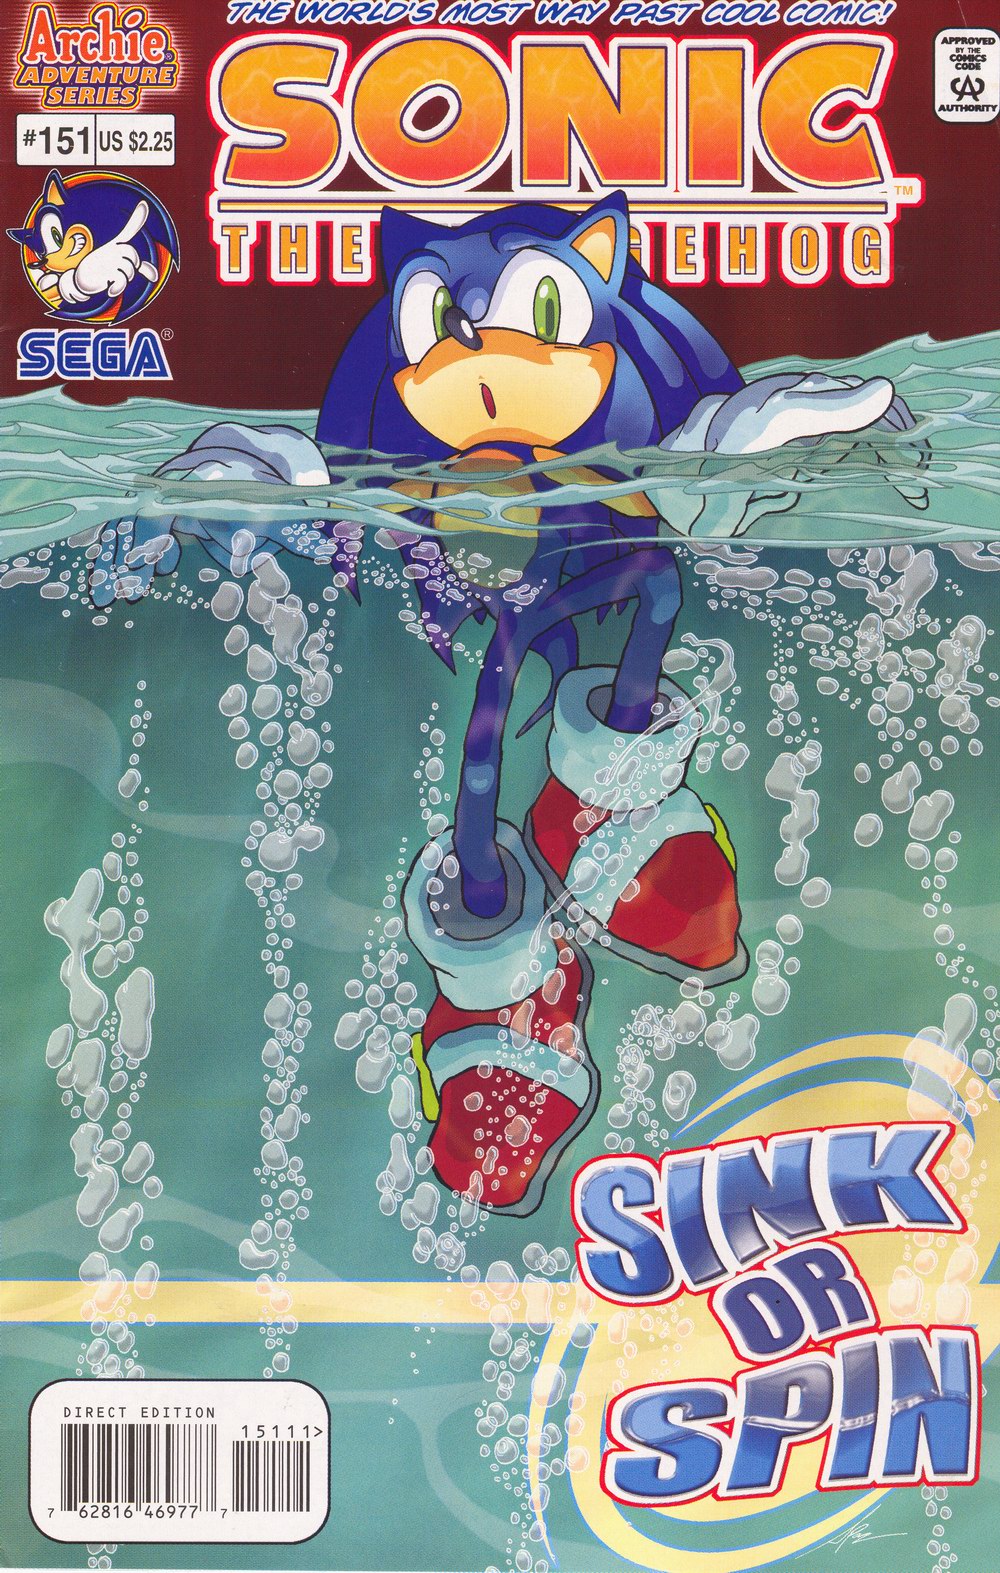 Sonic - Archie Adventure Series September 2005 Cover Page